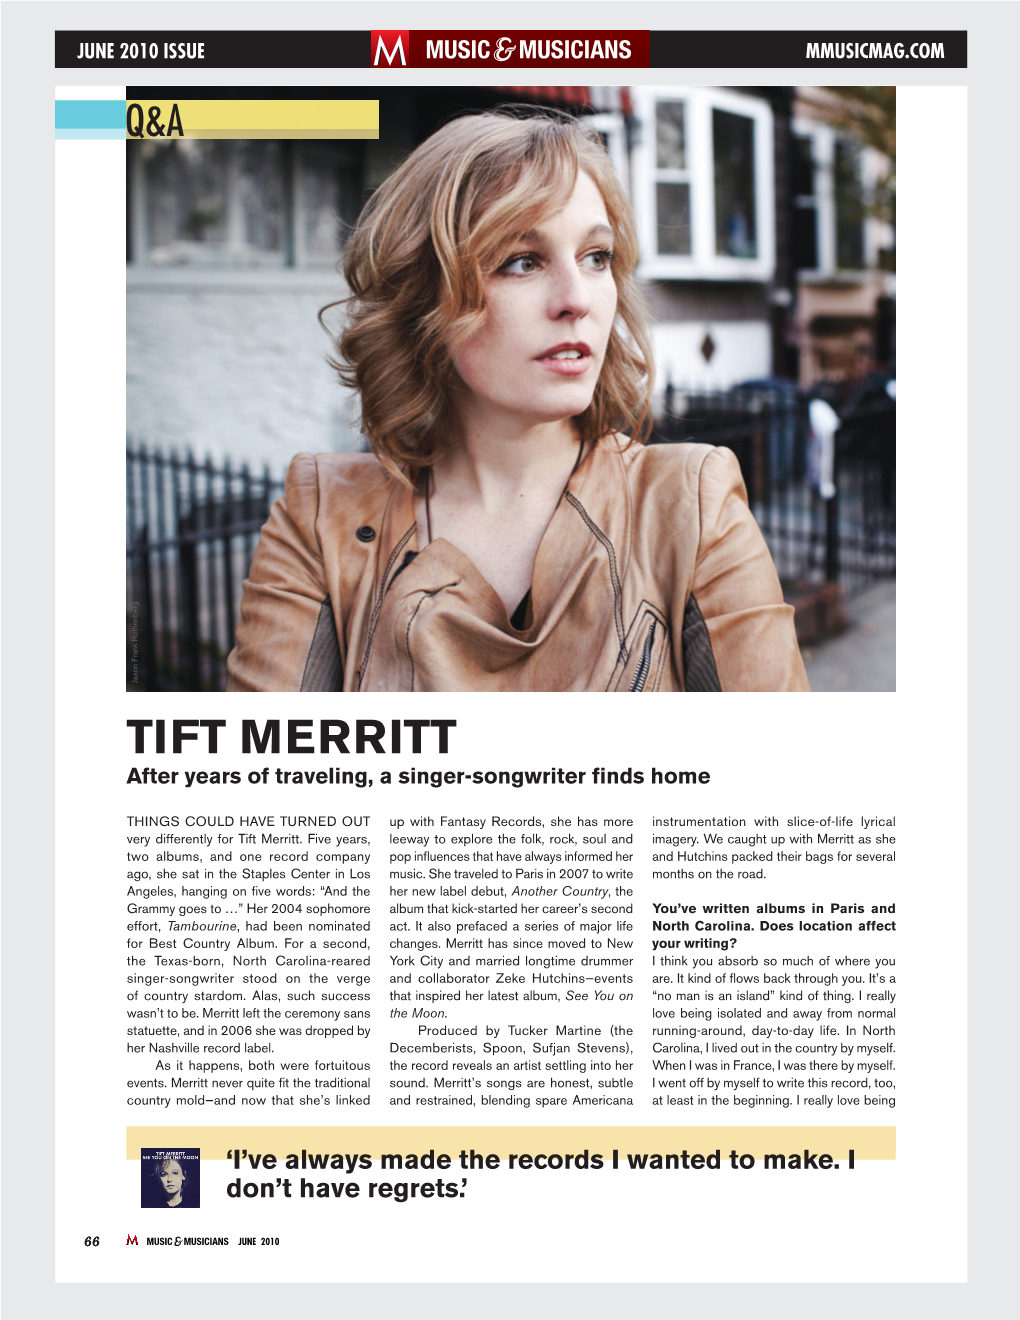 TIFT MERRITT After Years of Traveling, a Singer-Songwriter ﬁ Nds Home